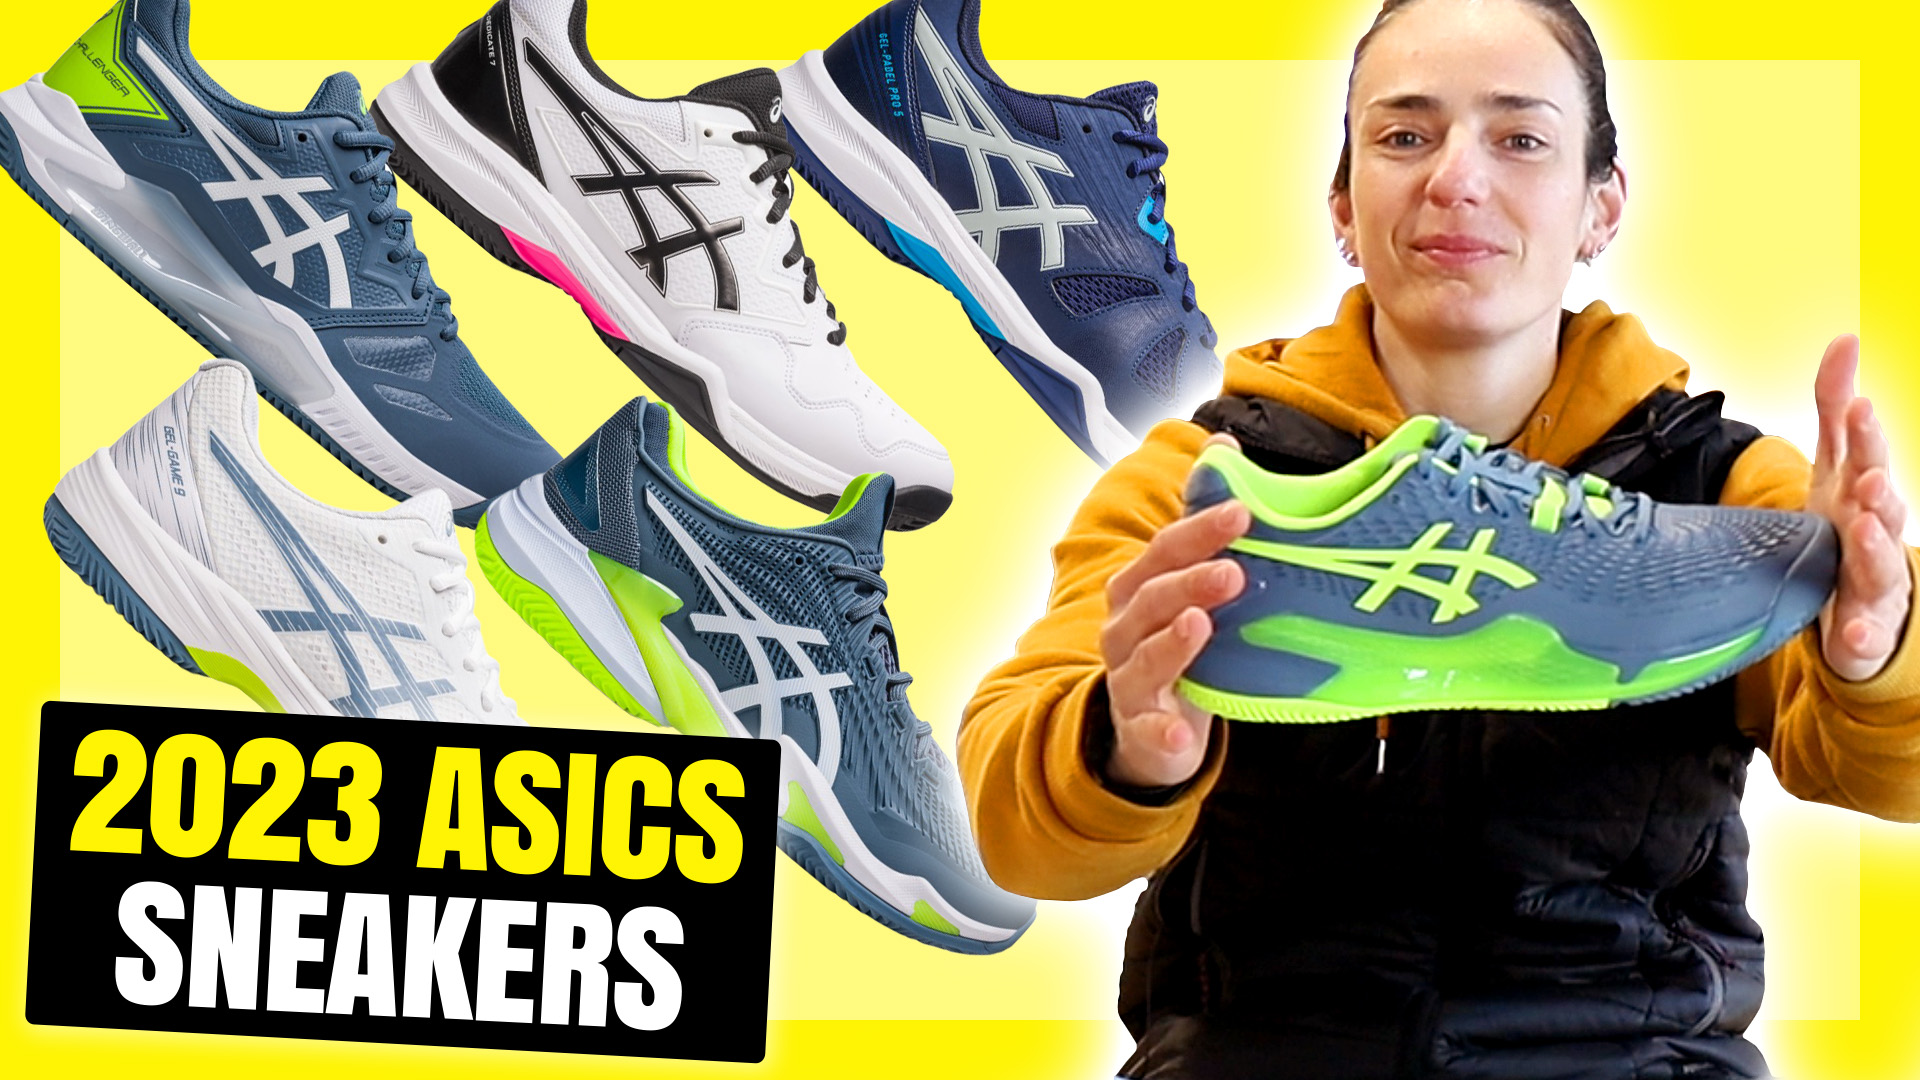 Asics 2023 padel shoes collection, new soles and technologies adapted to each track